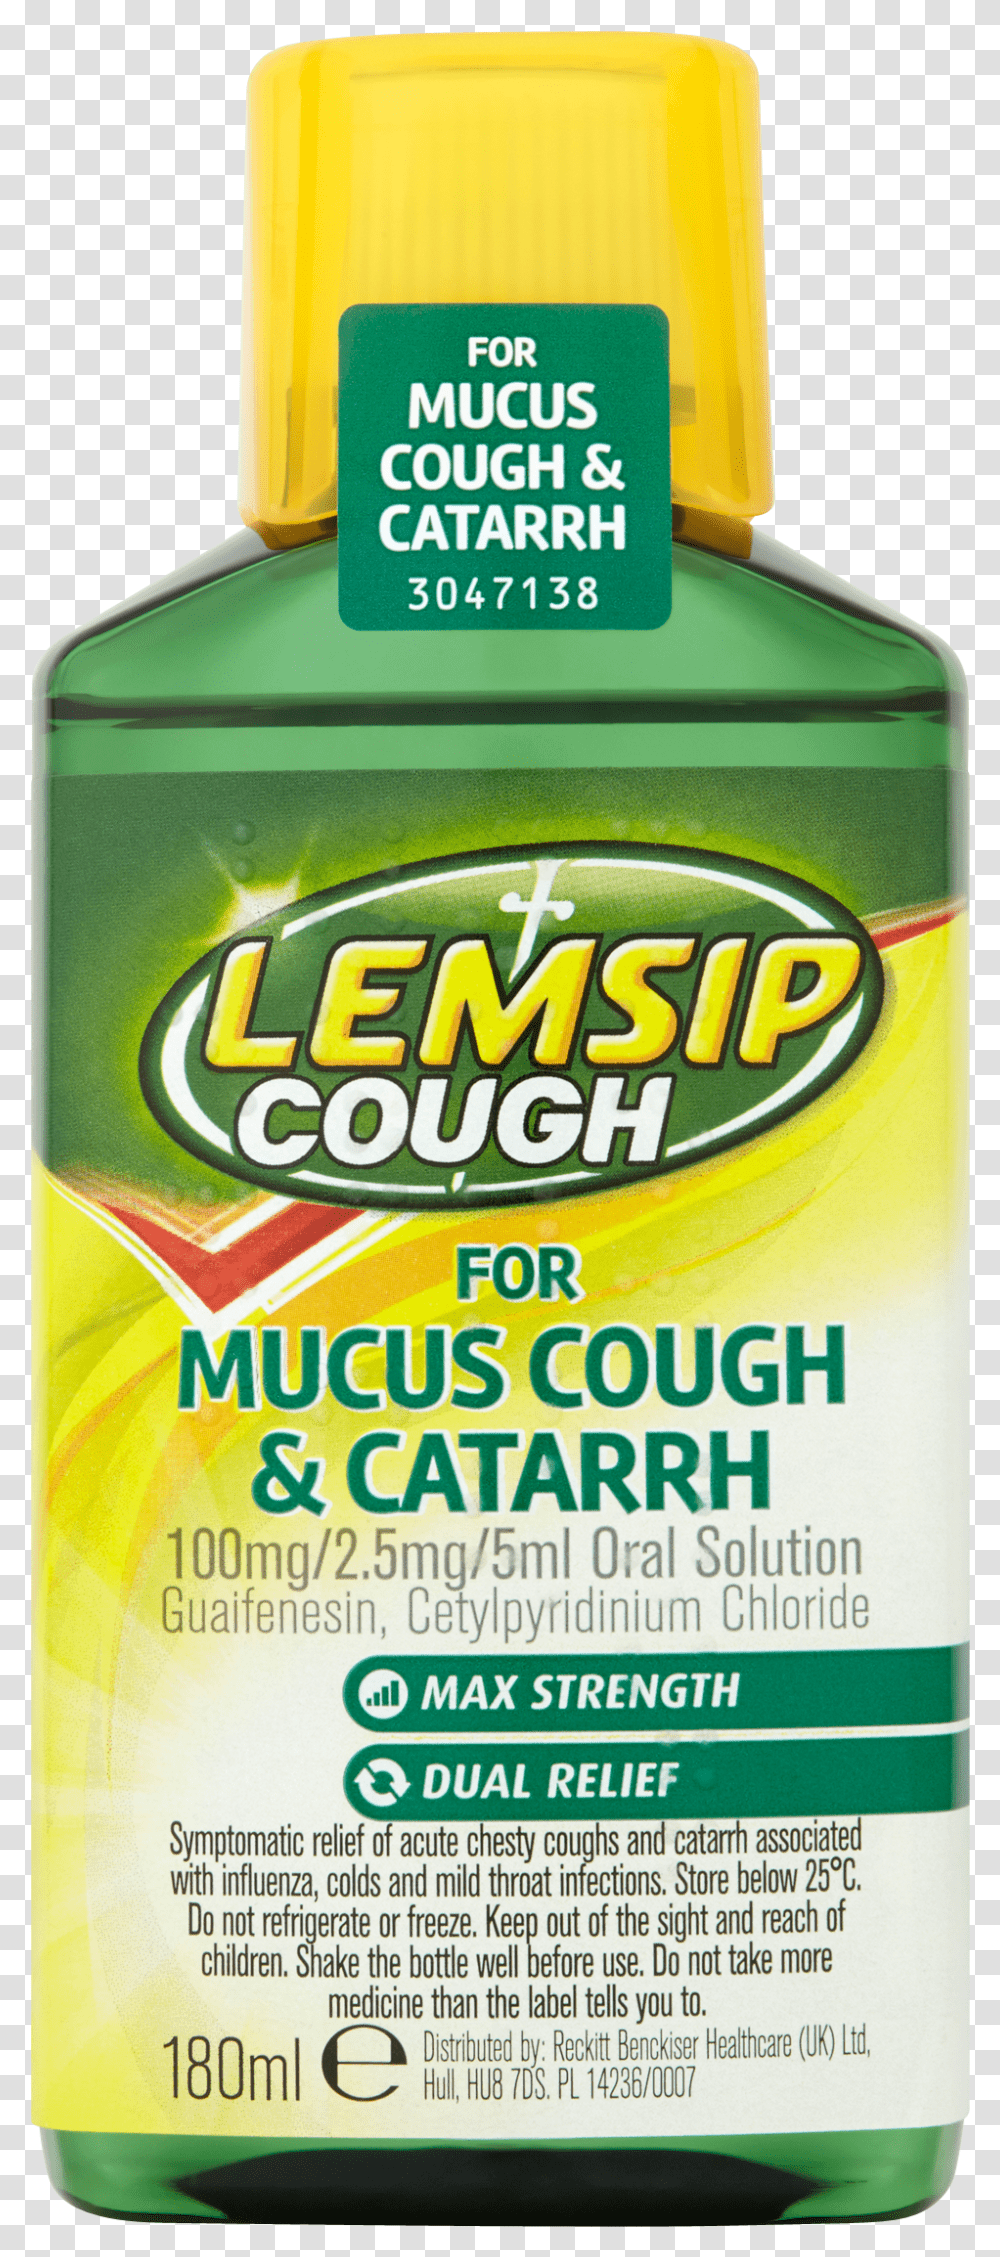 Lemsip Cough For Mucus Cough Amp Catarrh 100mg2 Medicine For Catarrh And Cough, Plant, Bottle, Food, Cosmetics Transparent Png